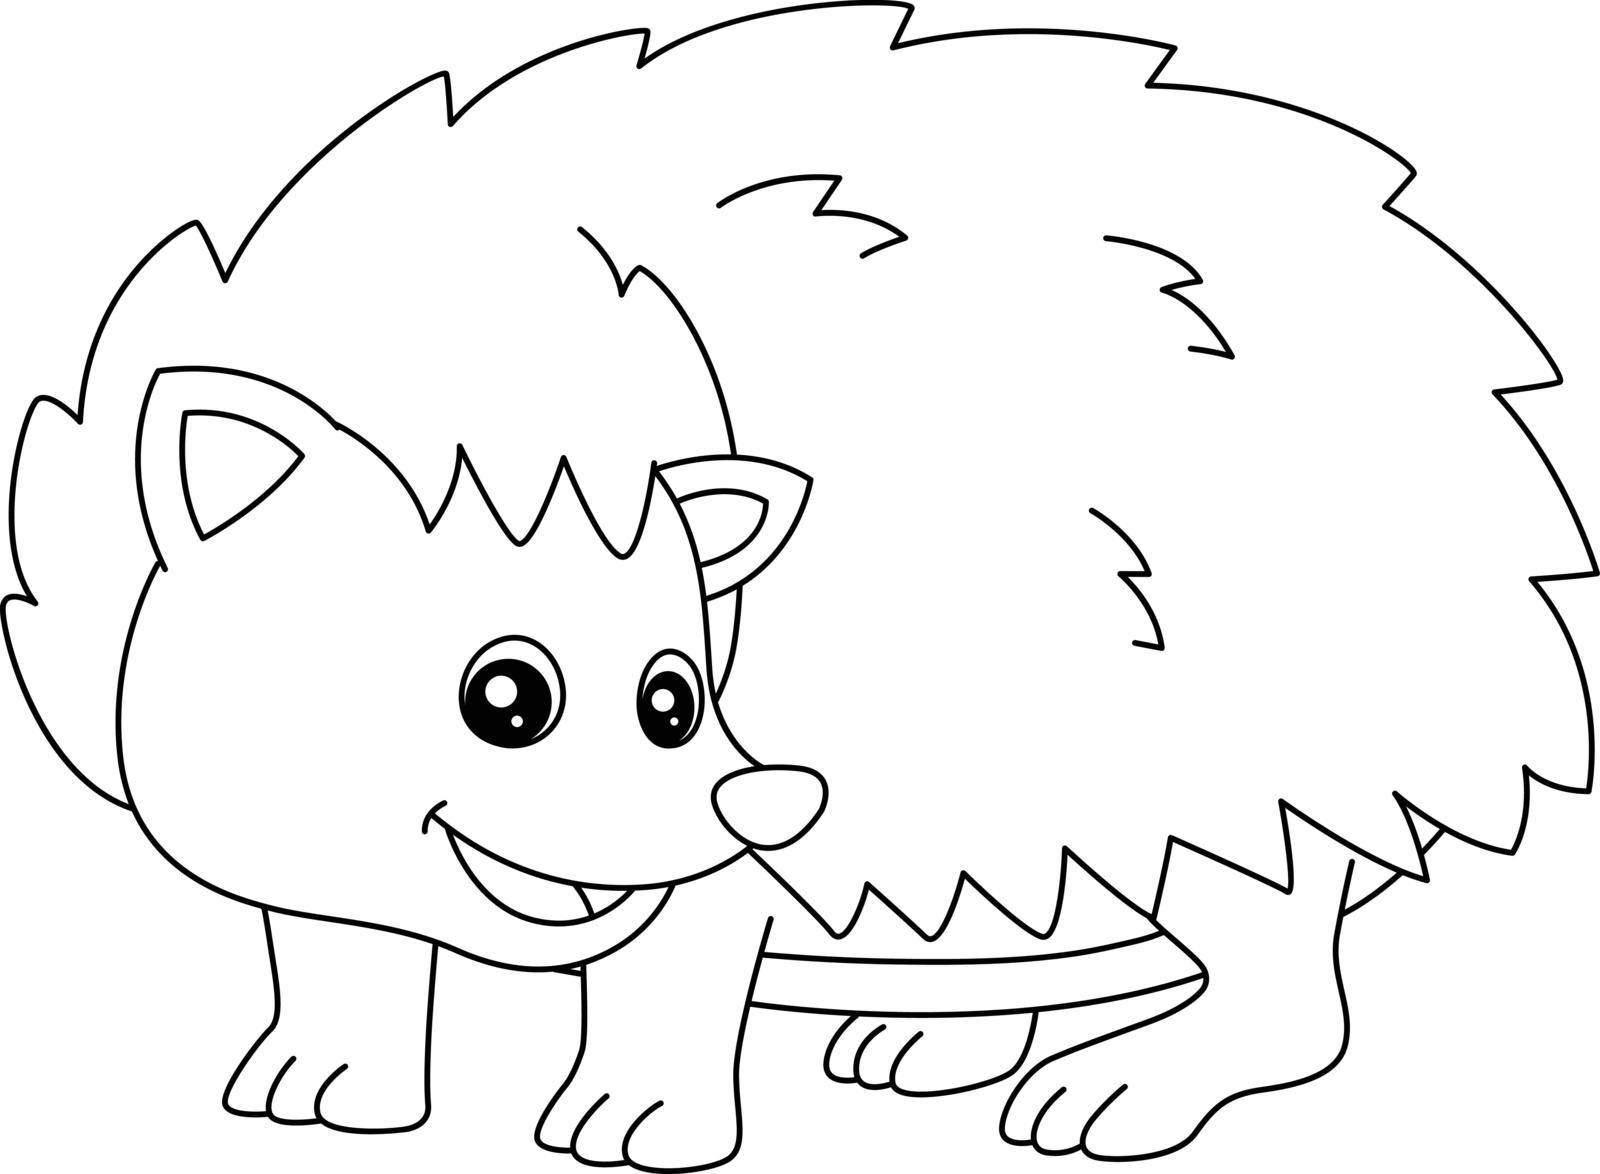 A cute and funny coloring page of a hedgehog. Provides hours of coloring fun for children. To color, this page is very easy. Suitable for little kids and toddlers.